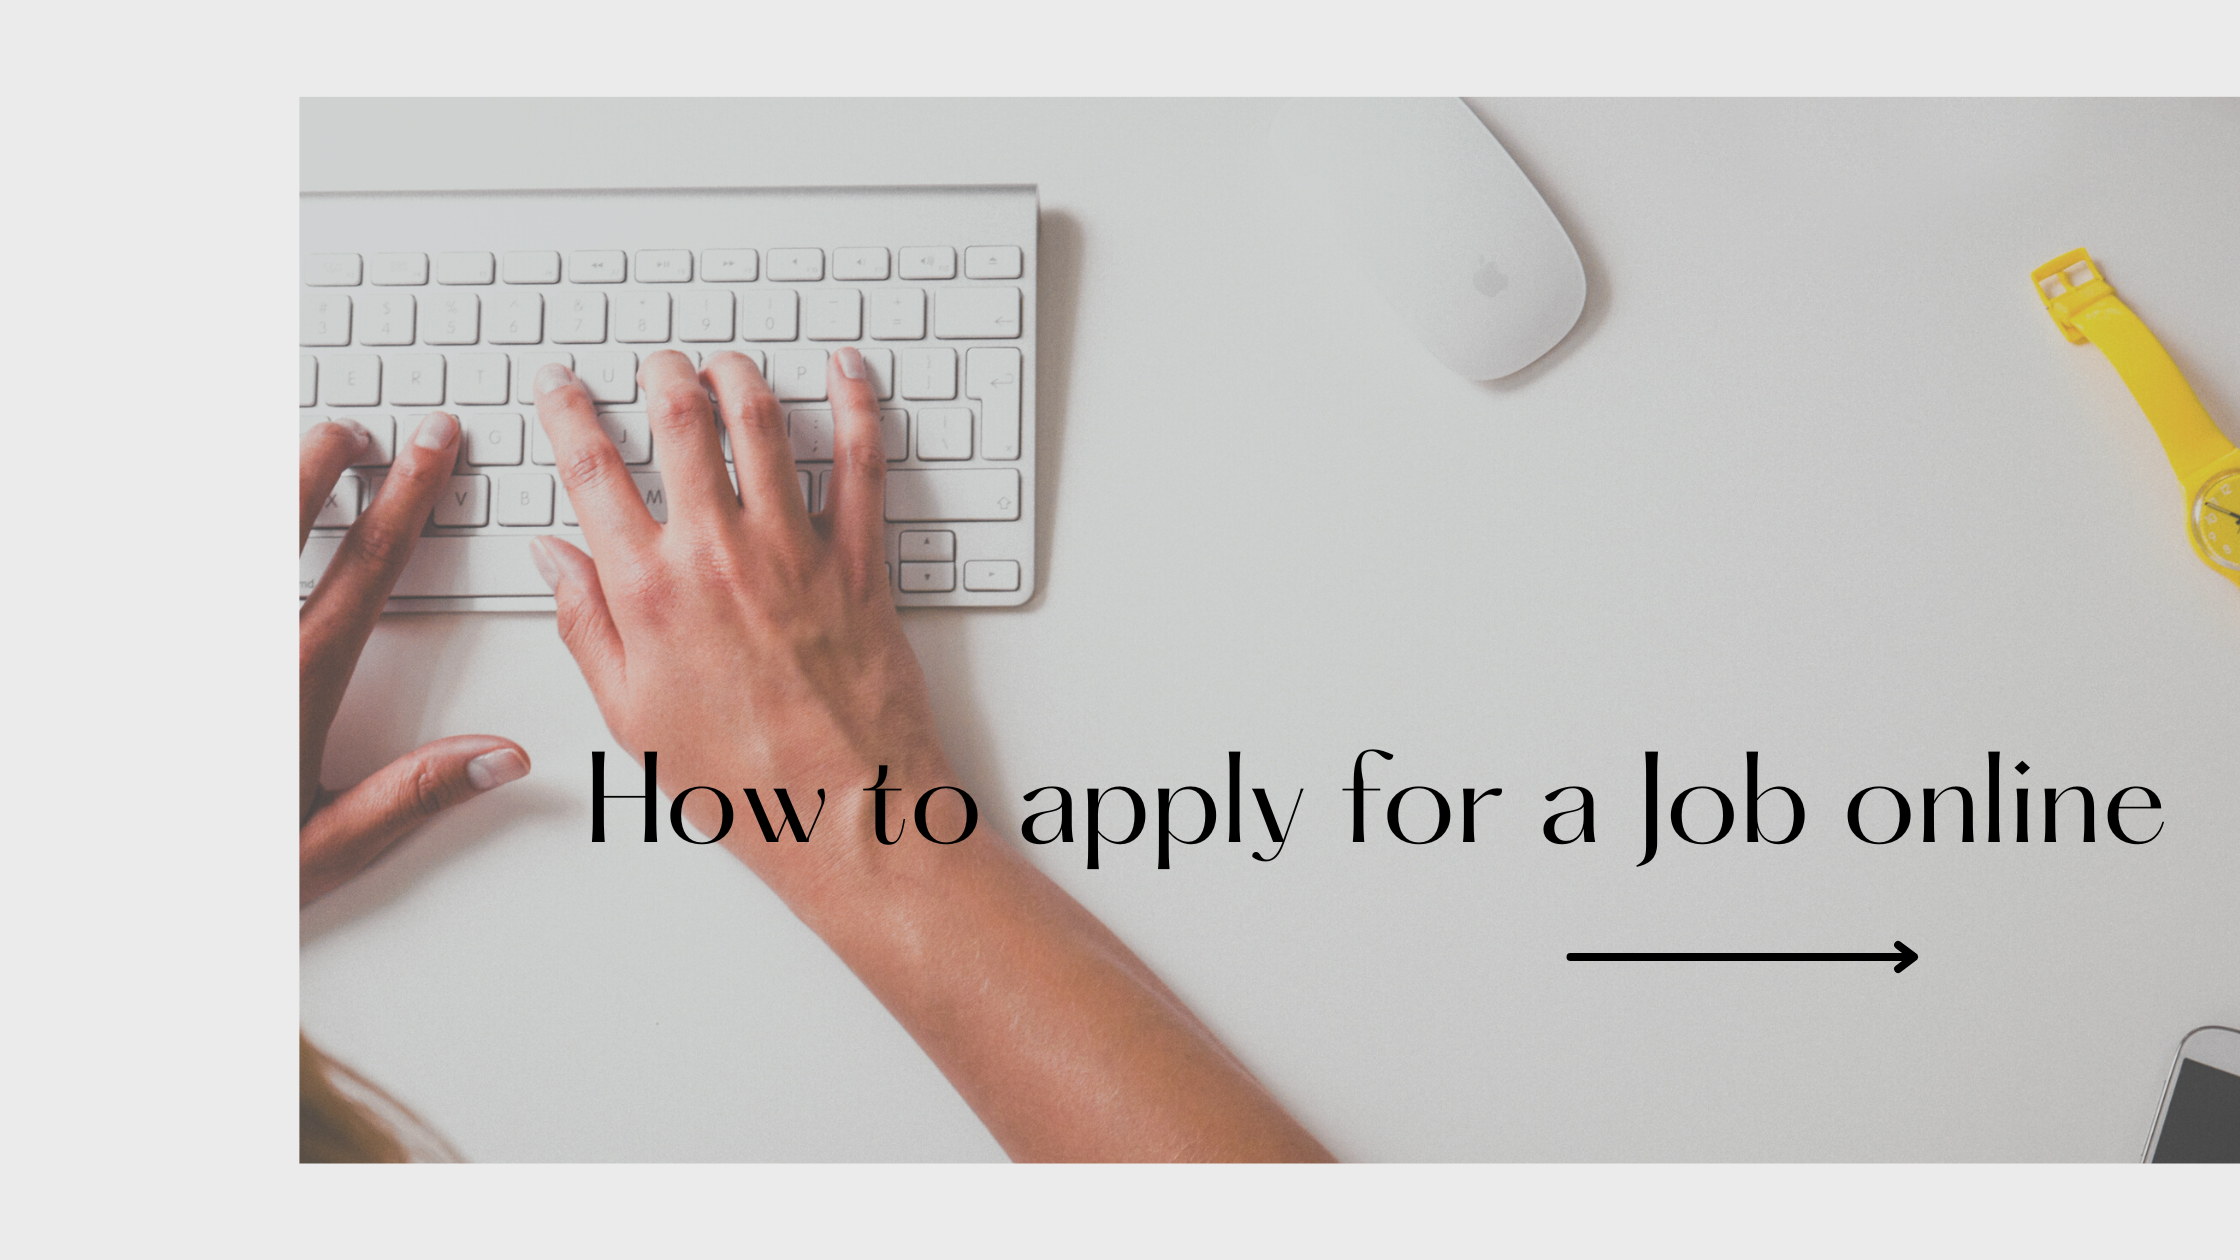 How to apply for a job online